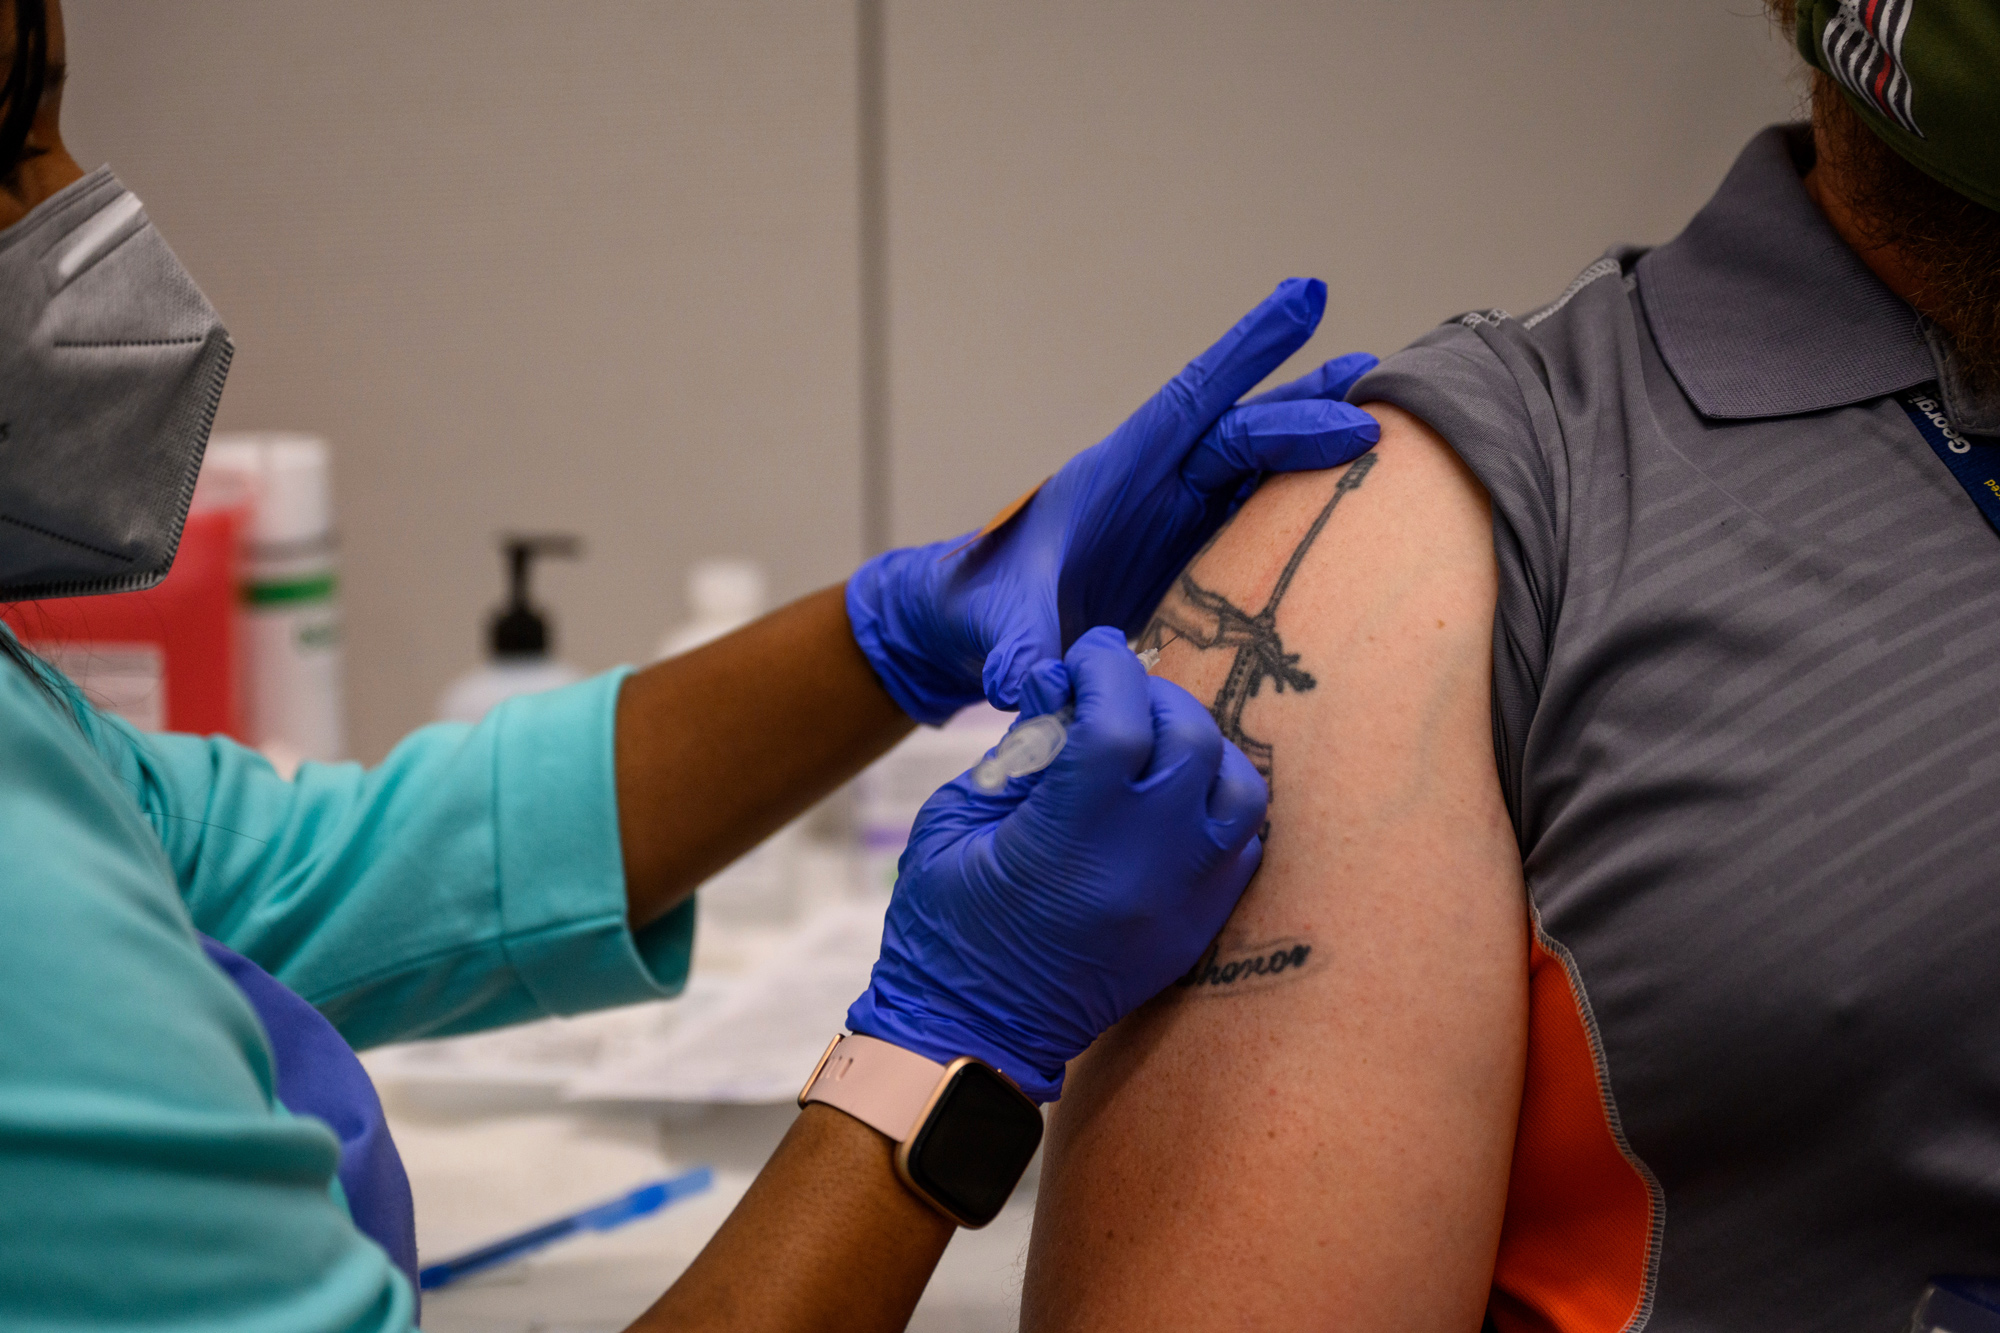 Georgia Tech employee Adam Jackson receives a Pfizer COVID-19 vaccination at a vaccination site on the campus of Georgia Tech on April 8 in Atlanta.